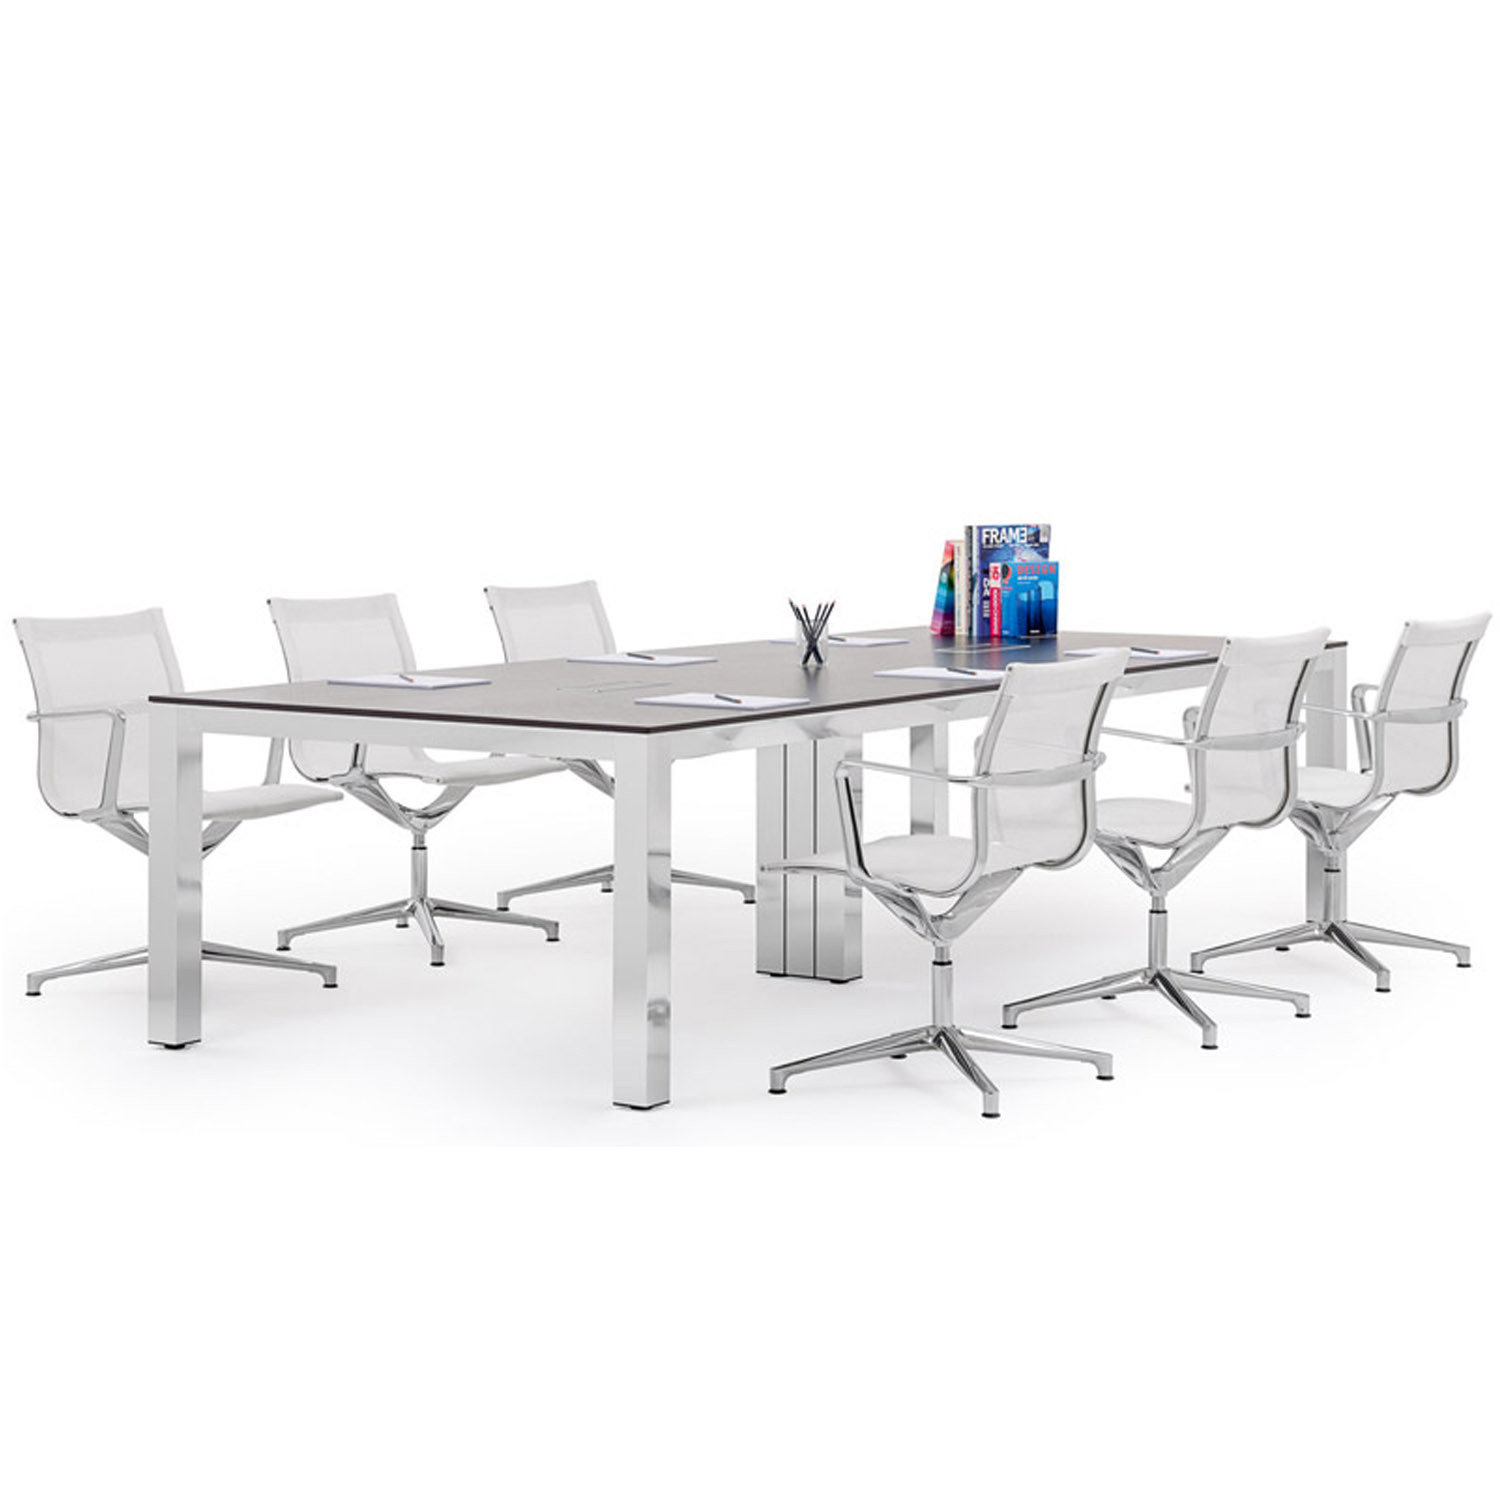 P80 Office Meeting Tables